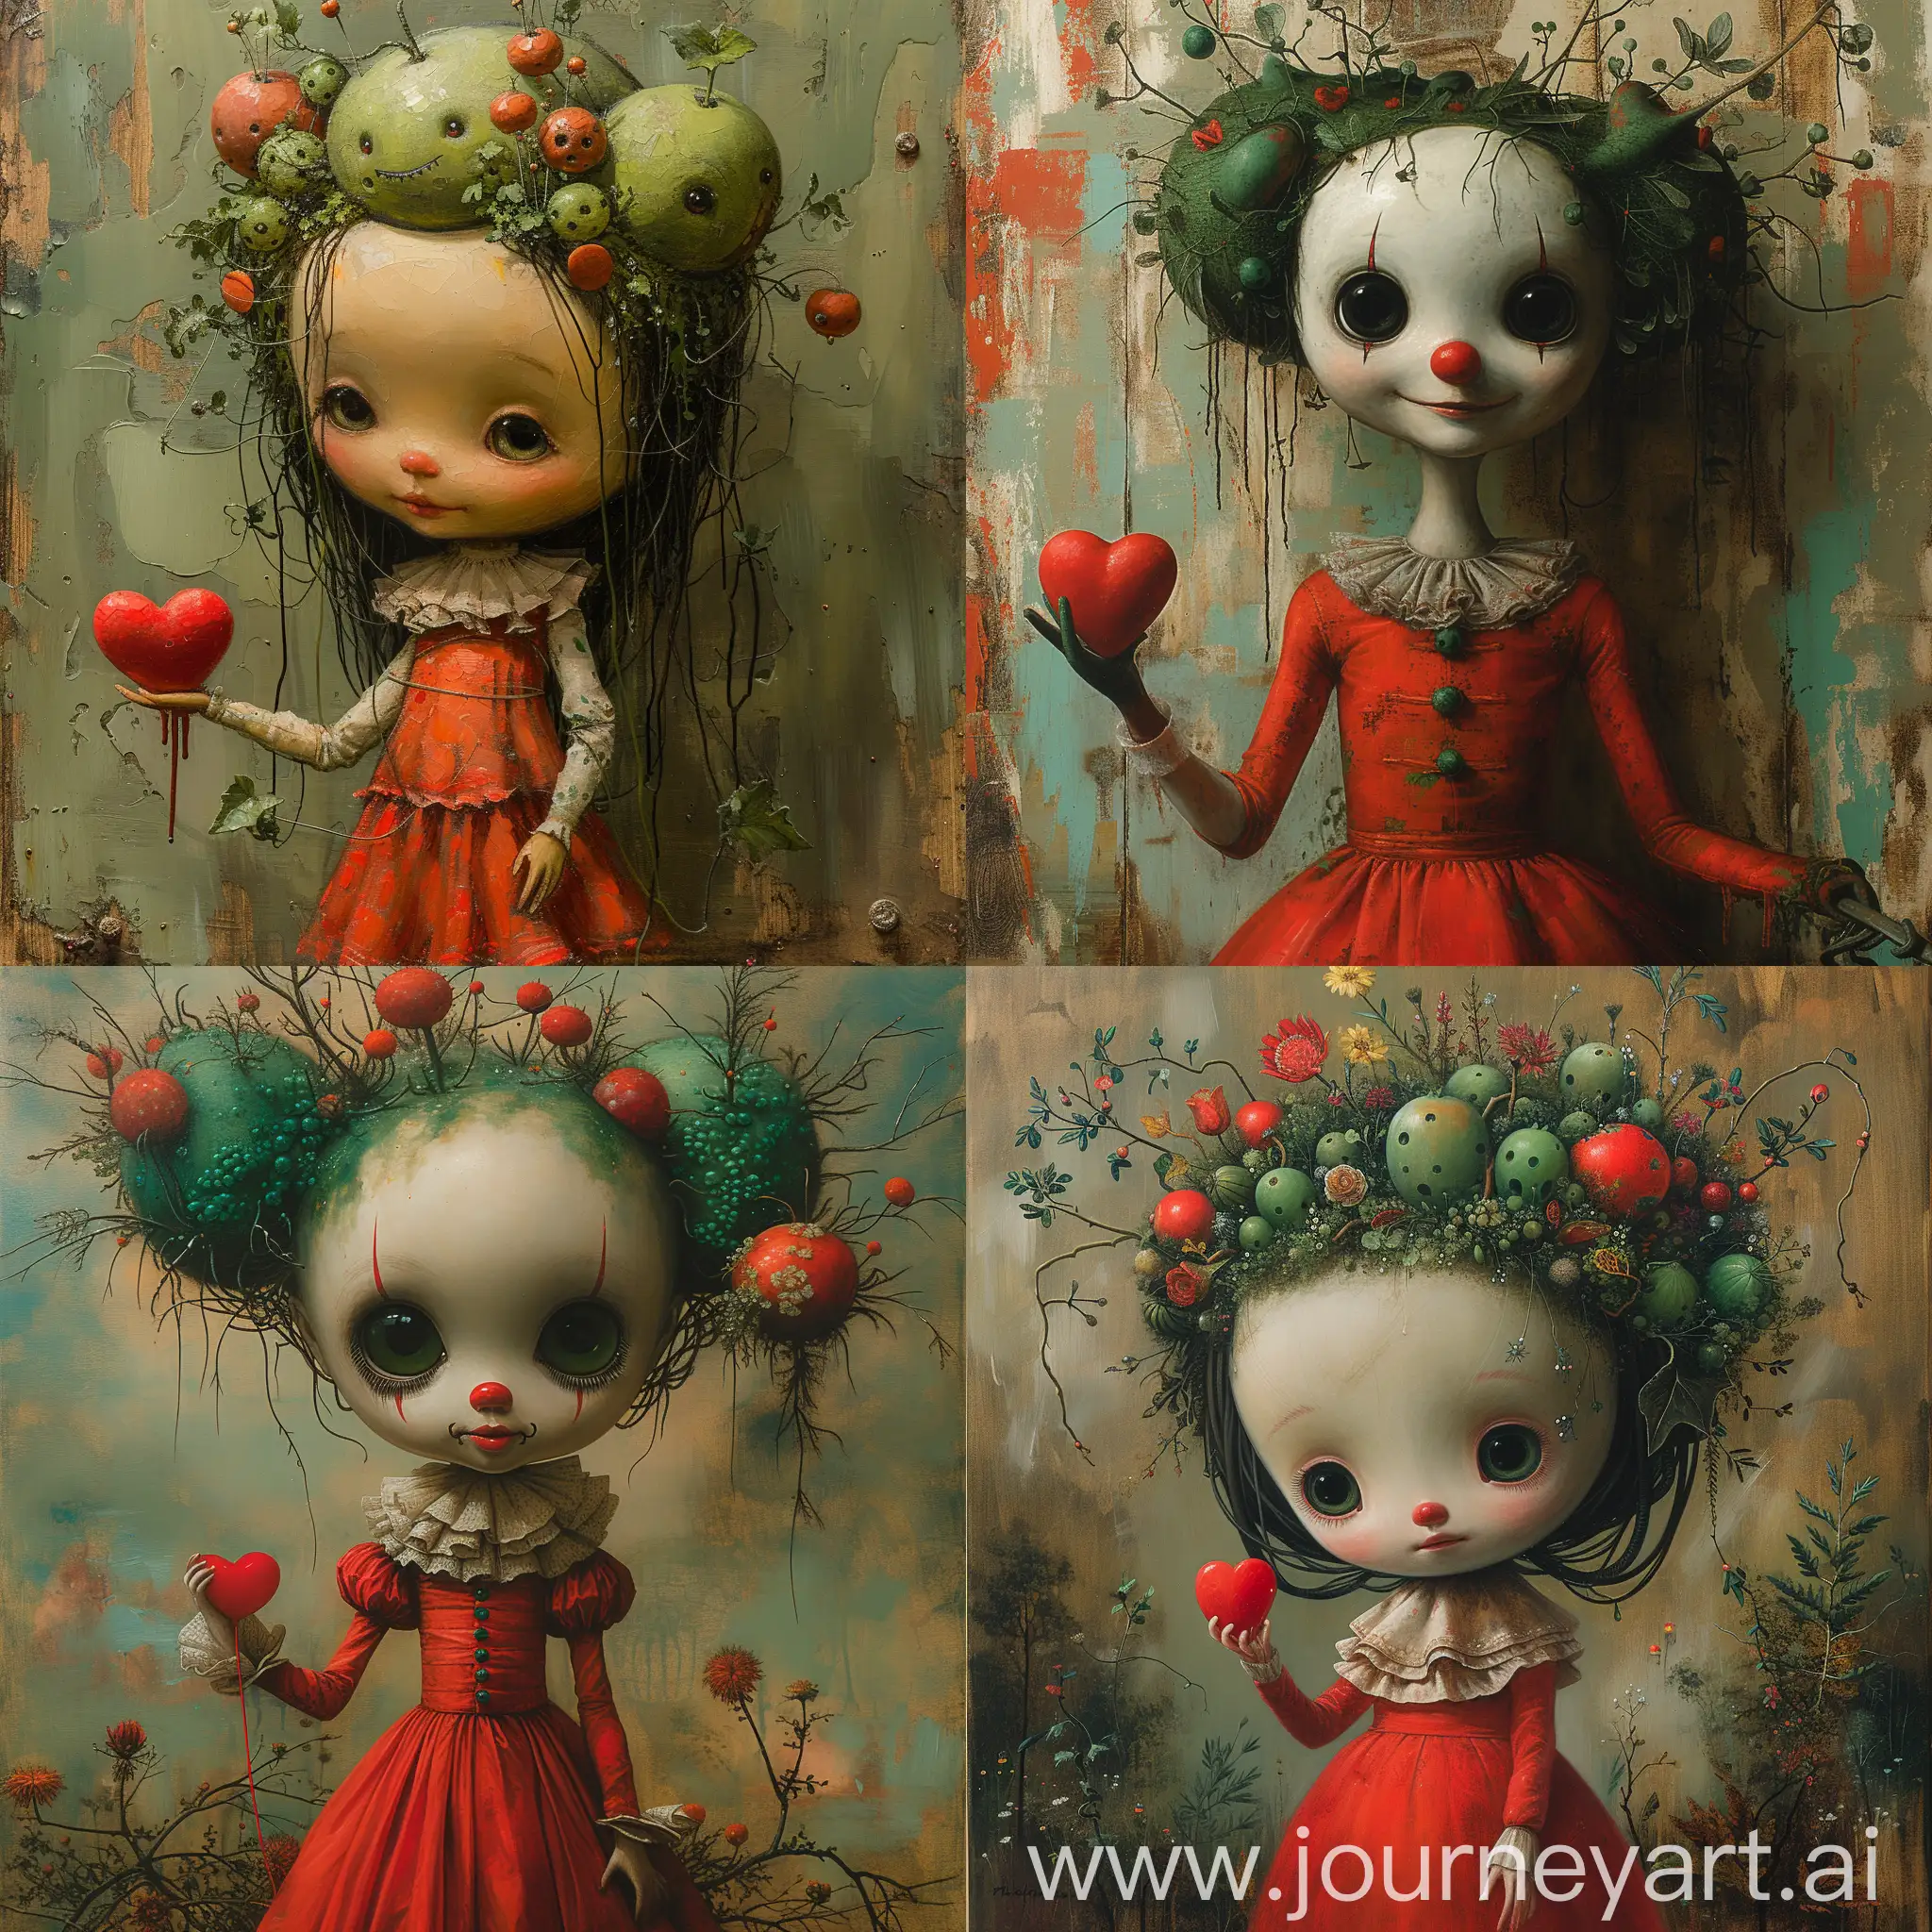 Surreal-China-Clown-Doll-with-Red-Heart-in-Red-Dress-on-Bright-Matte-Background